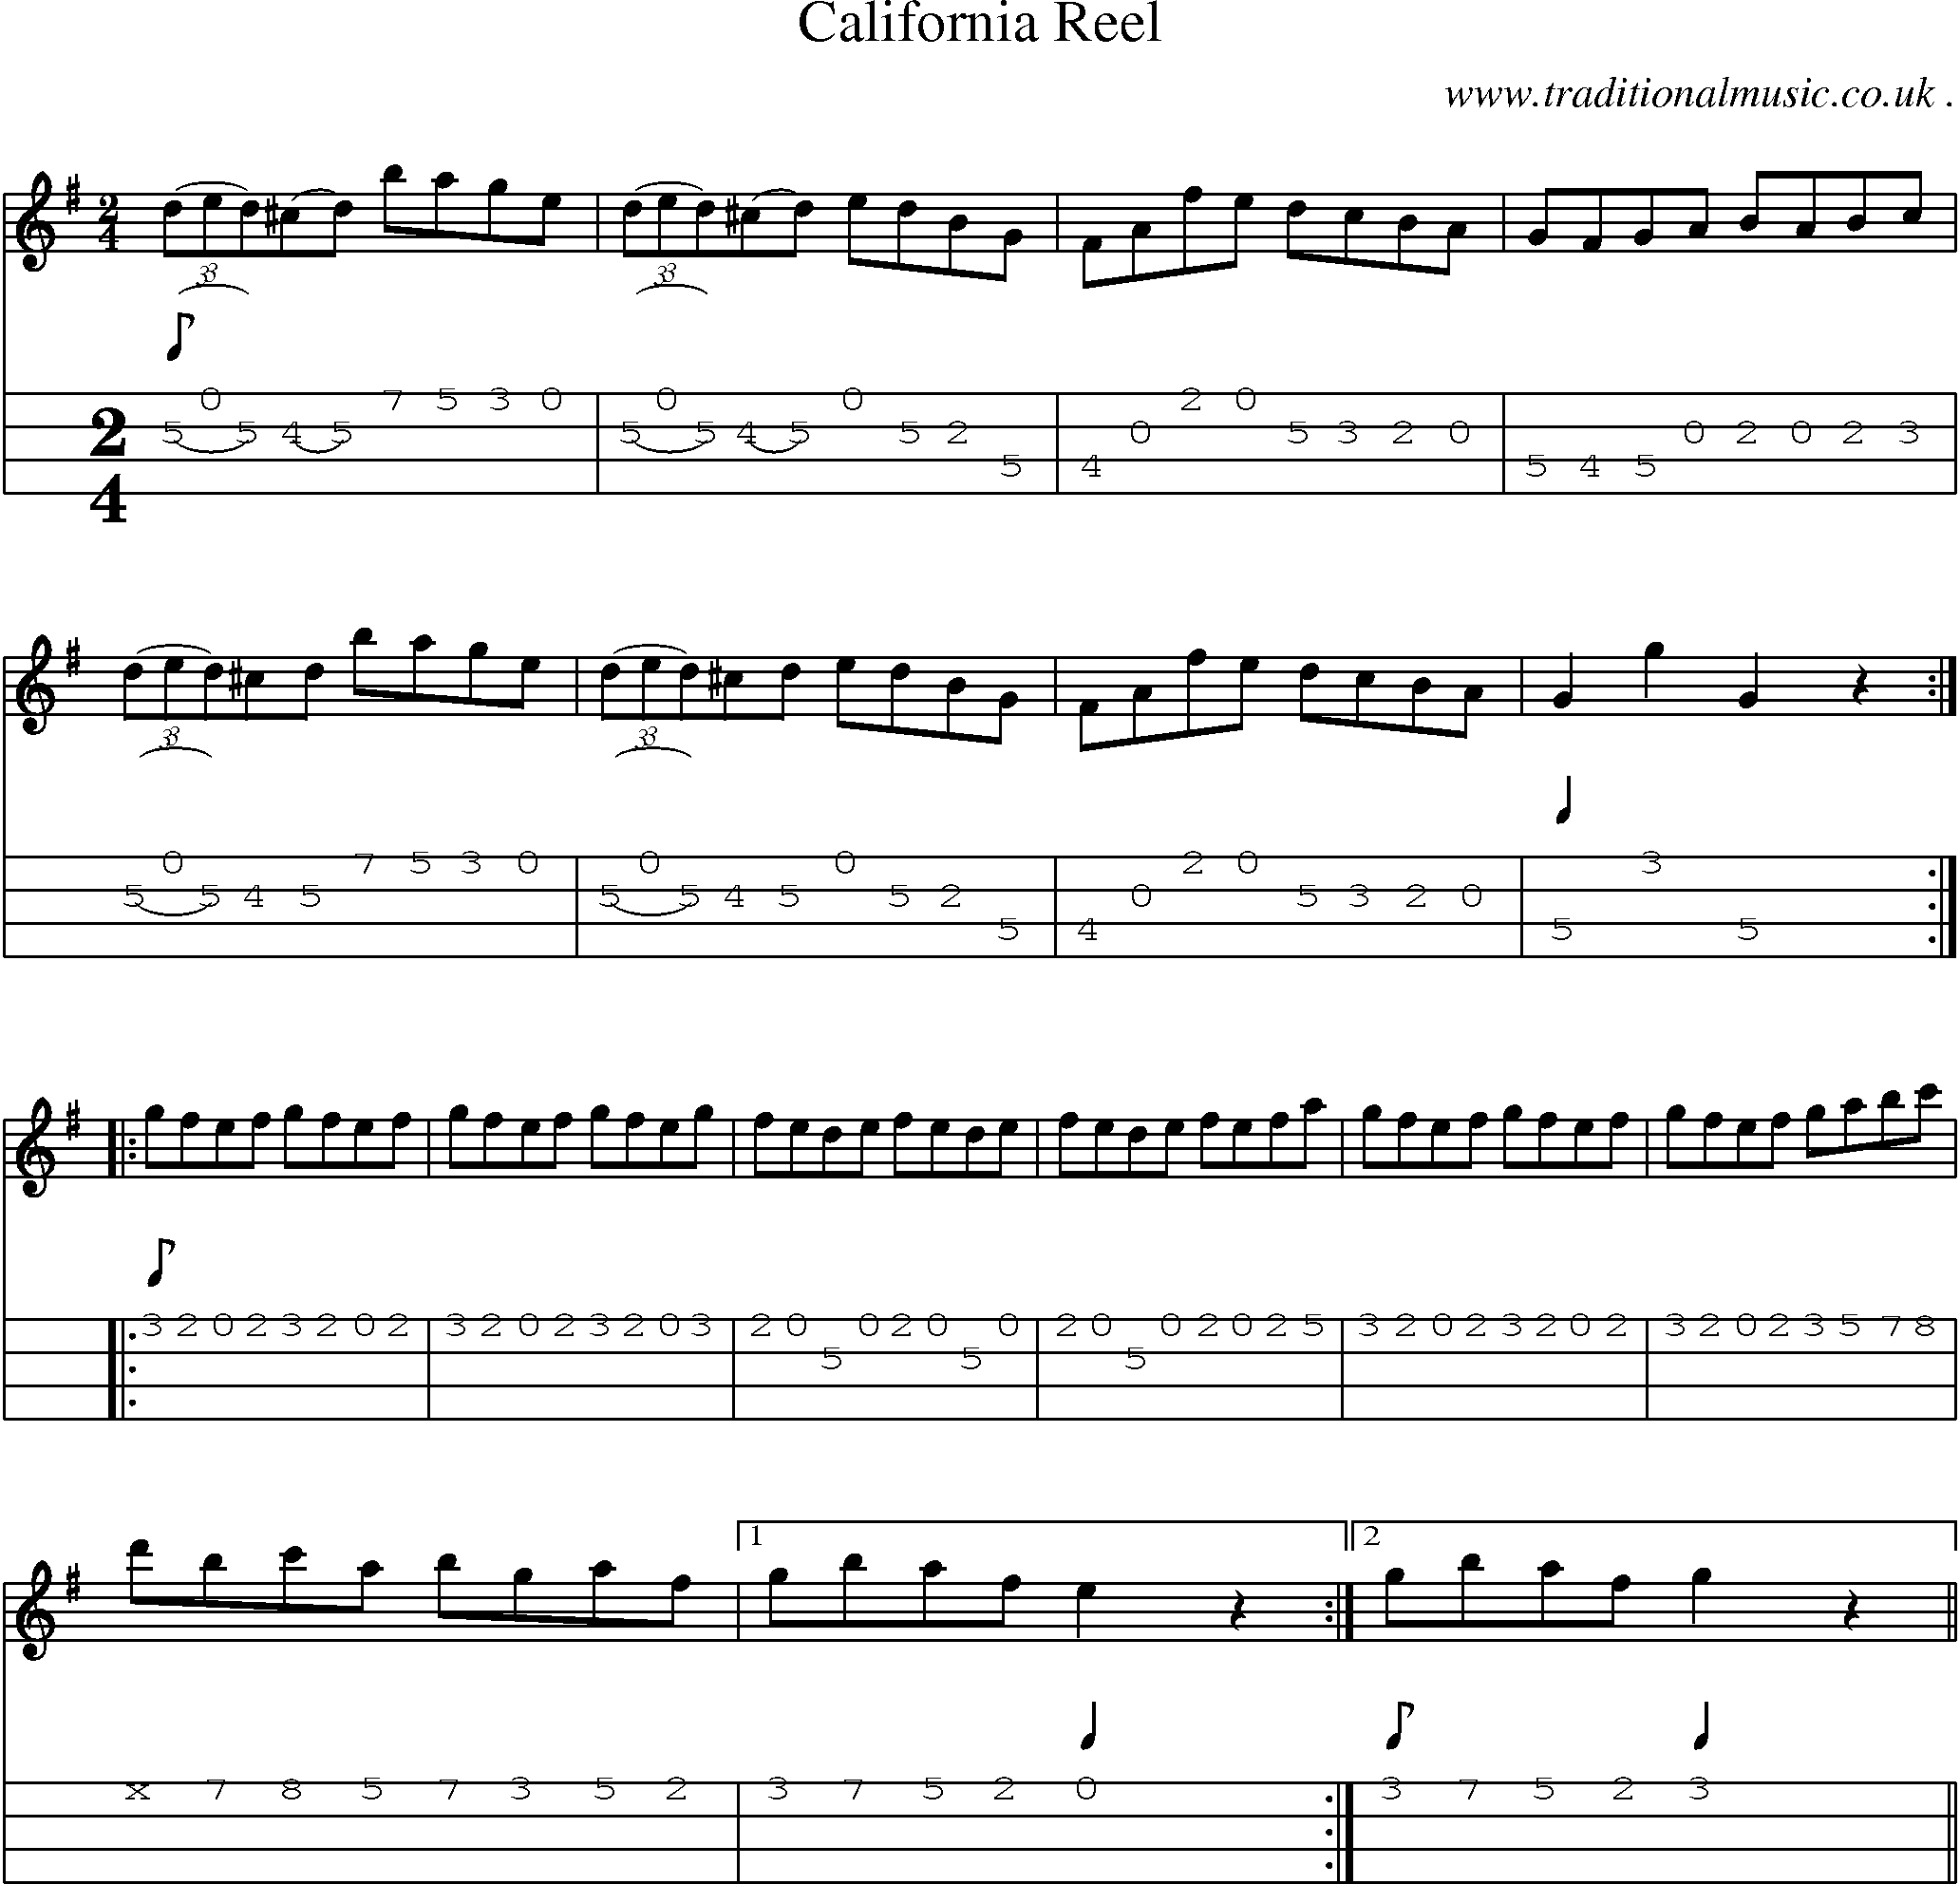 Music Score and Mandolin Tabs for California Reel